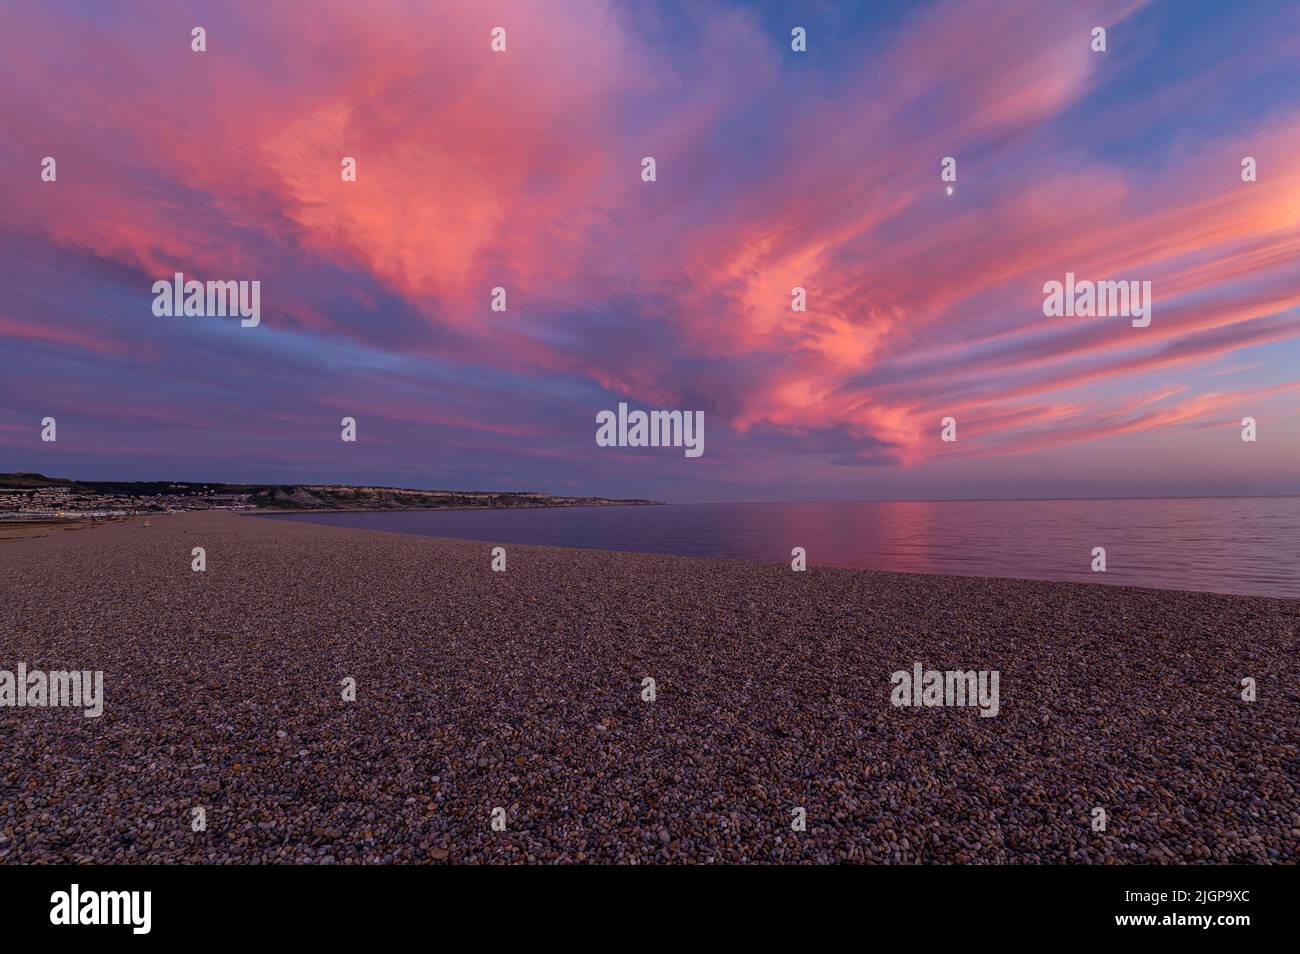 Pink sky as the sun set at Chesil beach with bank of shingle and flat calm sea reflecting the pink glowing clouds along the Jurassic coast of Dorset. Stock Photo